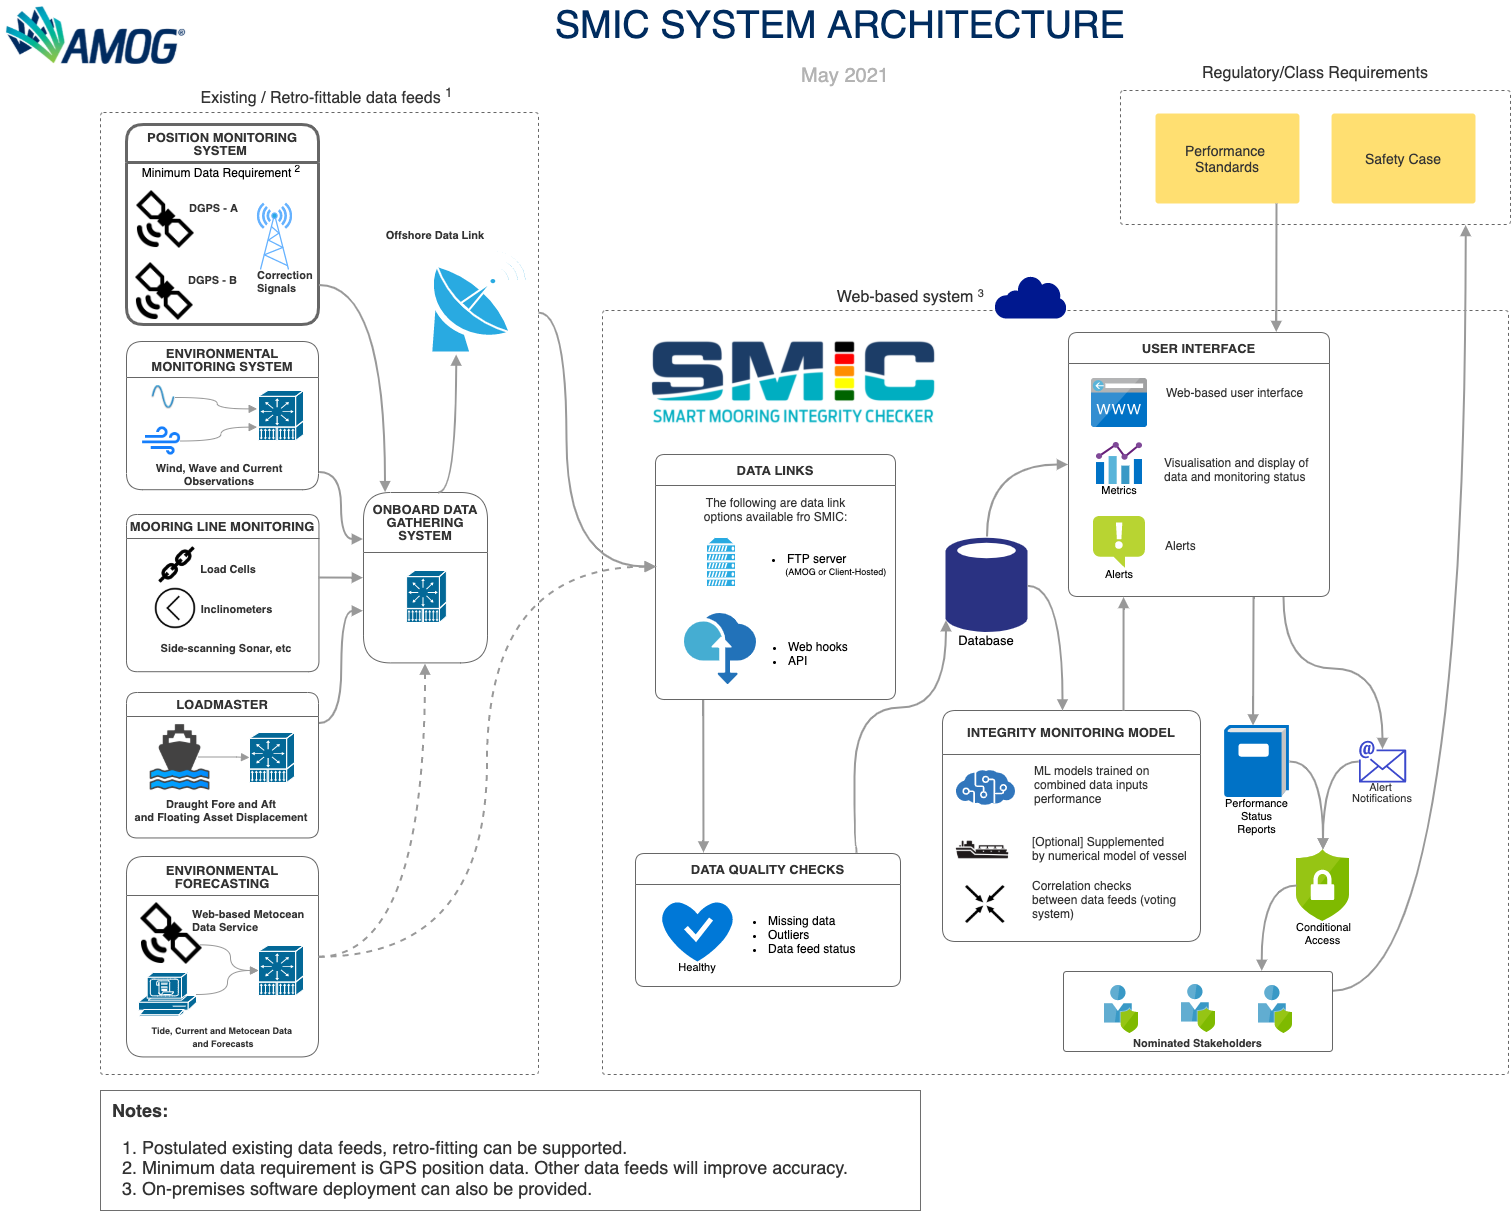 SMIC System Architecture